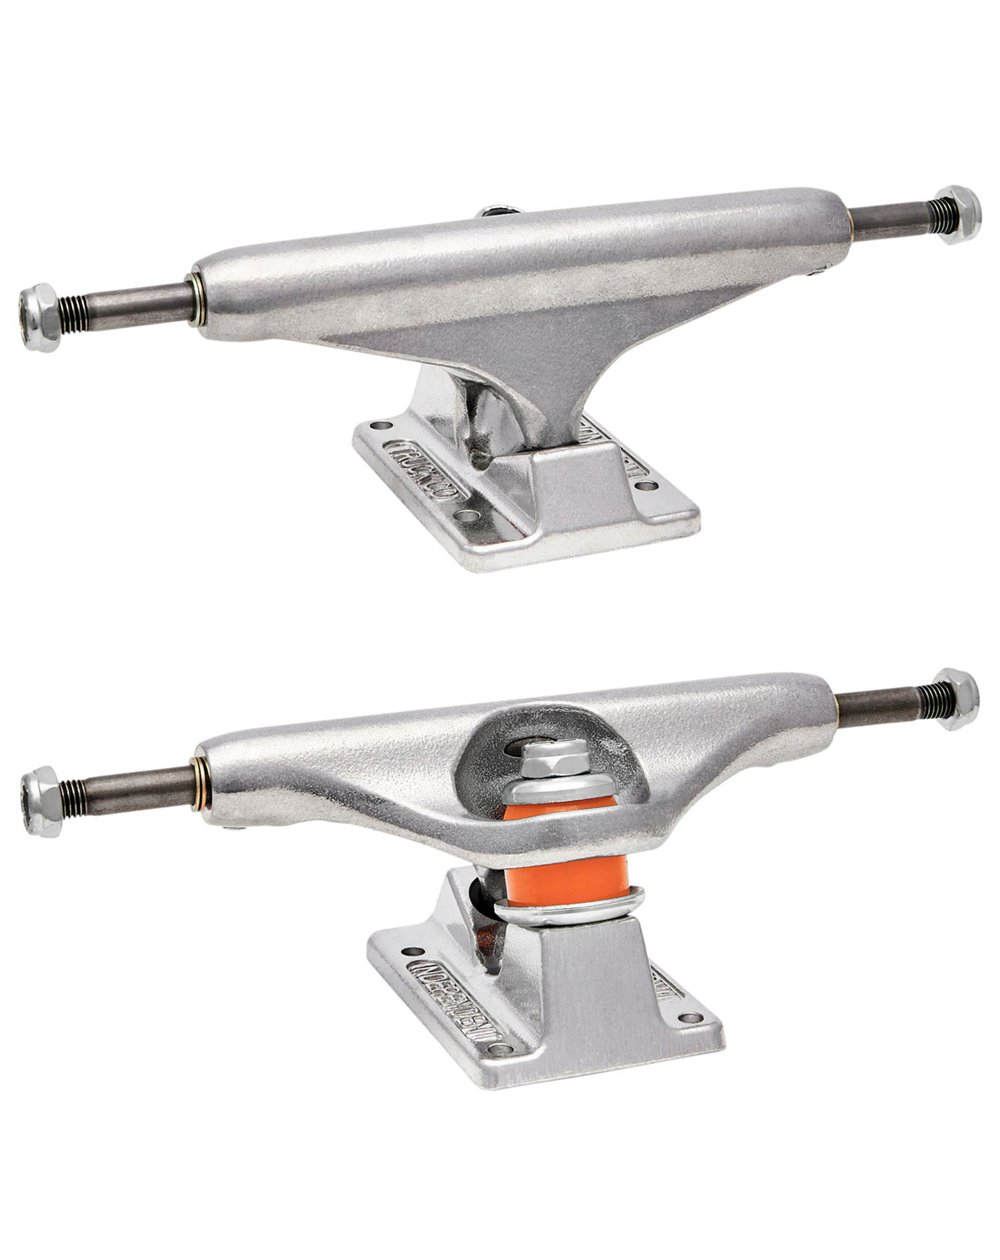 Independent Stage XI Standard 139mm Skateboard Trucks pack of 2